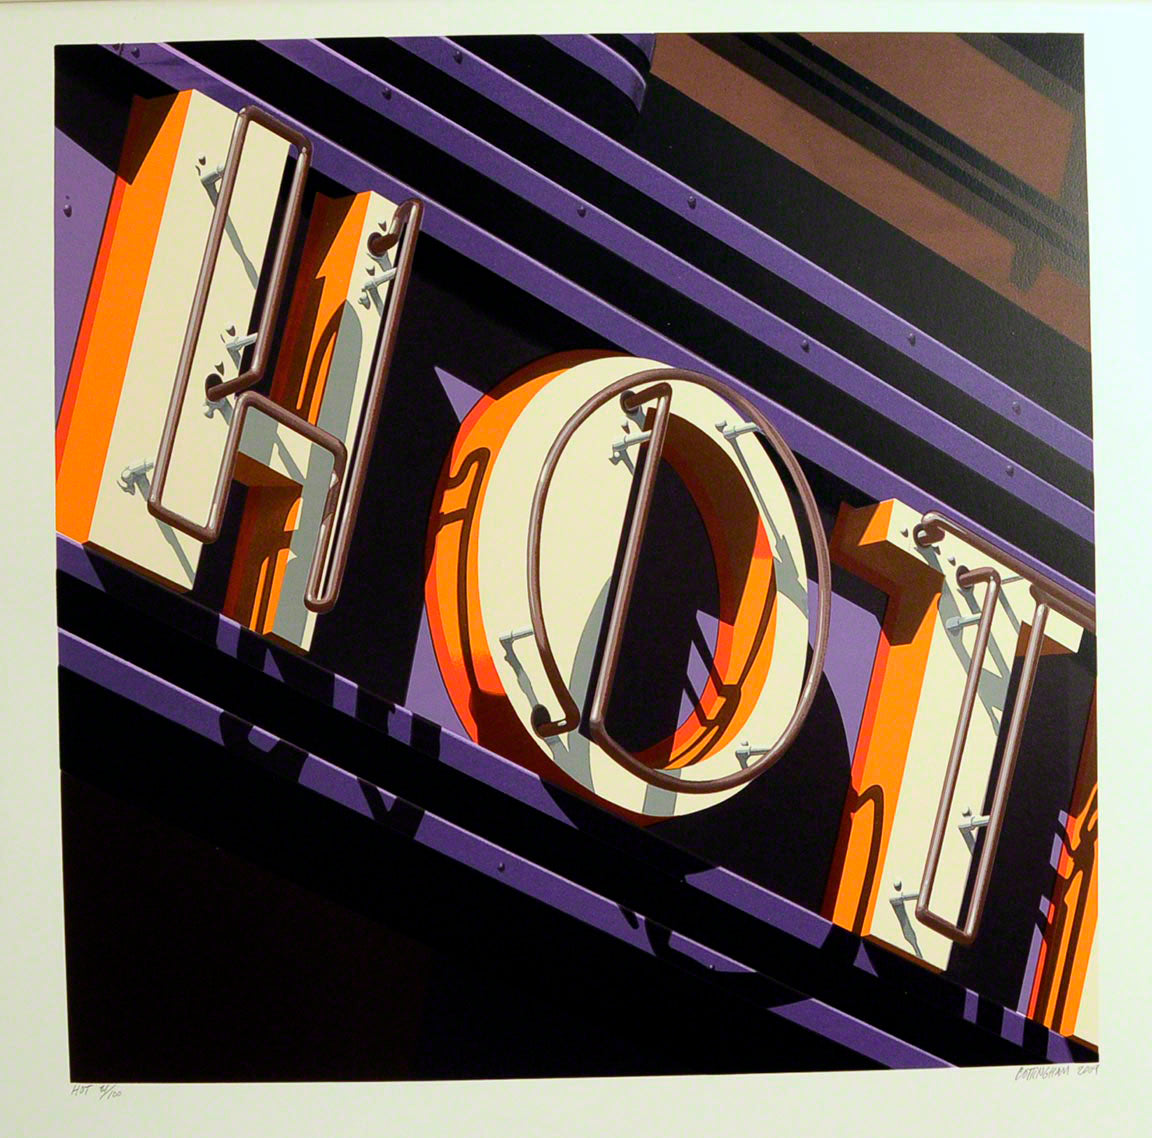 American Signs HOT by Robert Cottingham